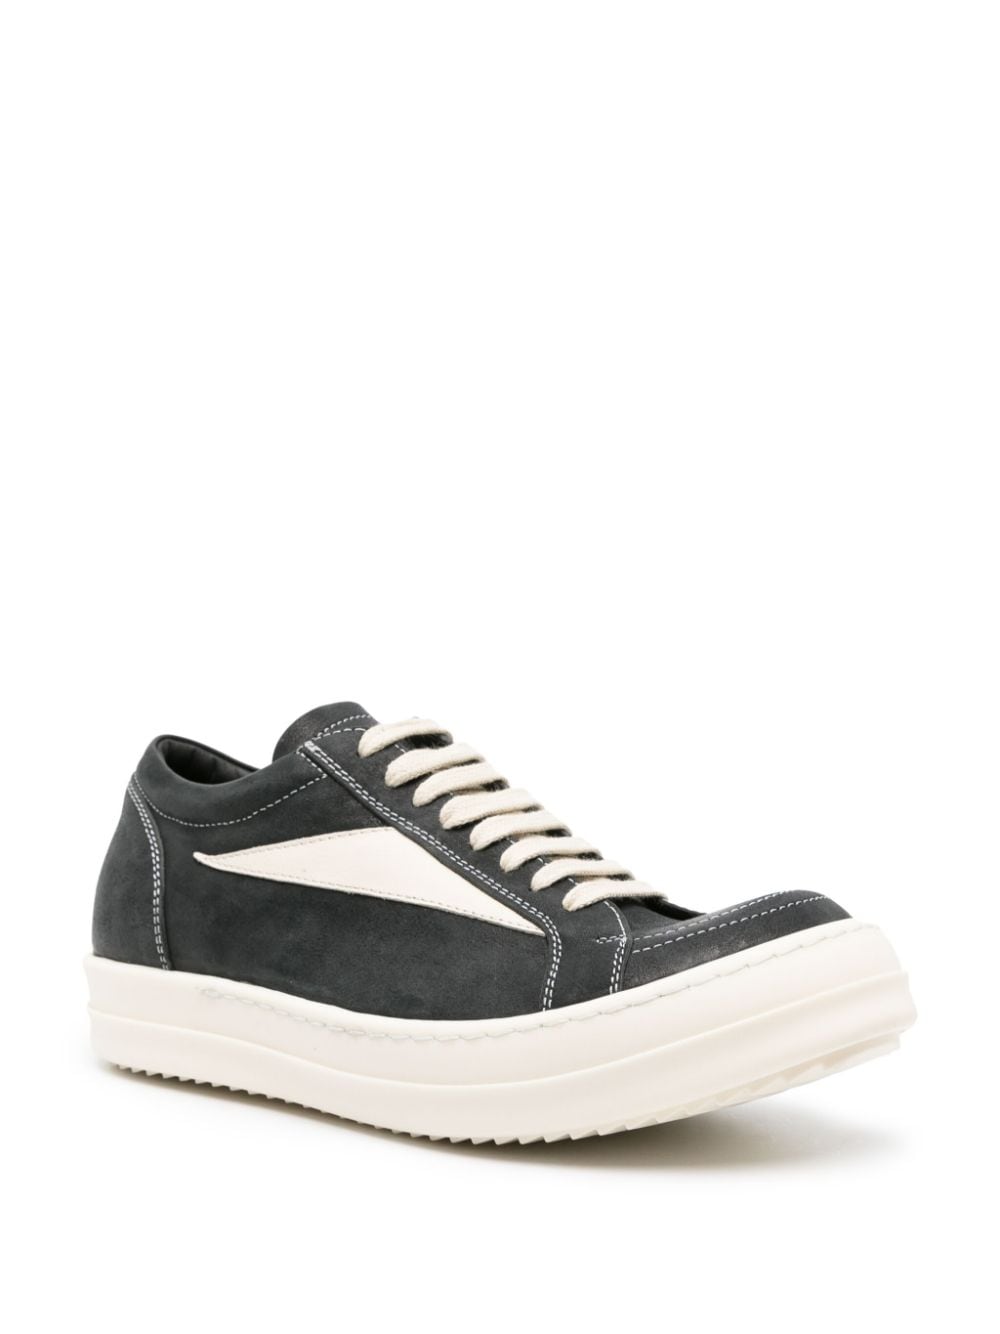 Rick Owens Luxor Leather Sneakers - Farfetch